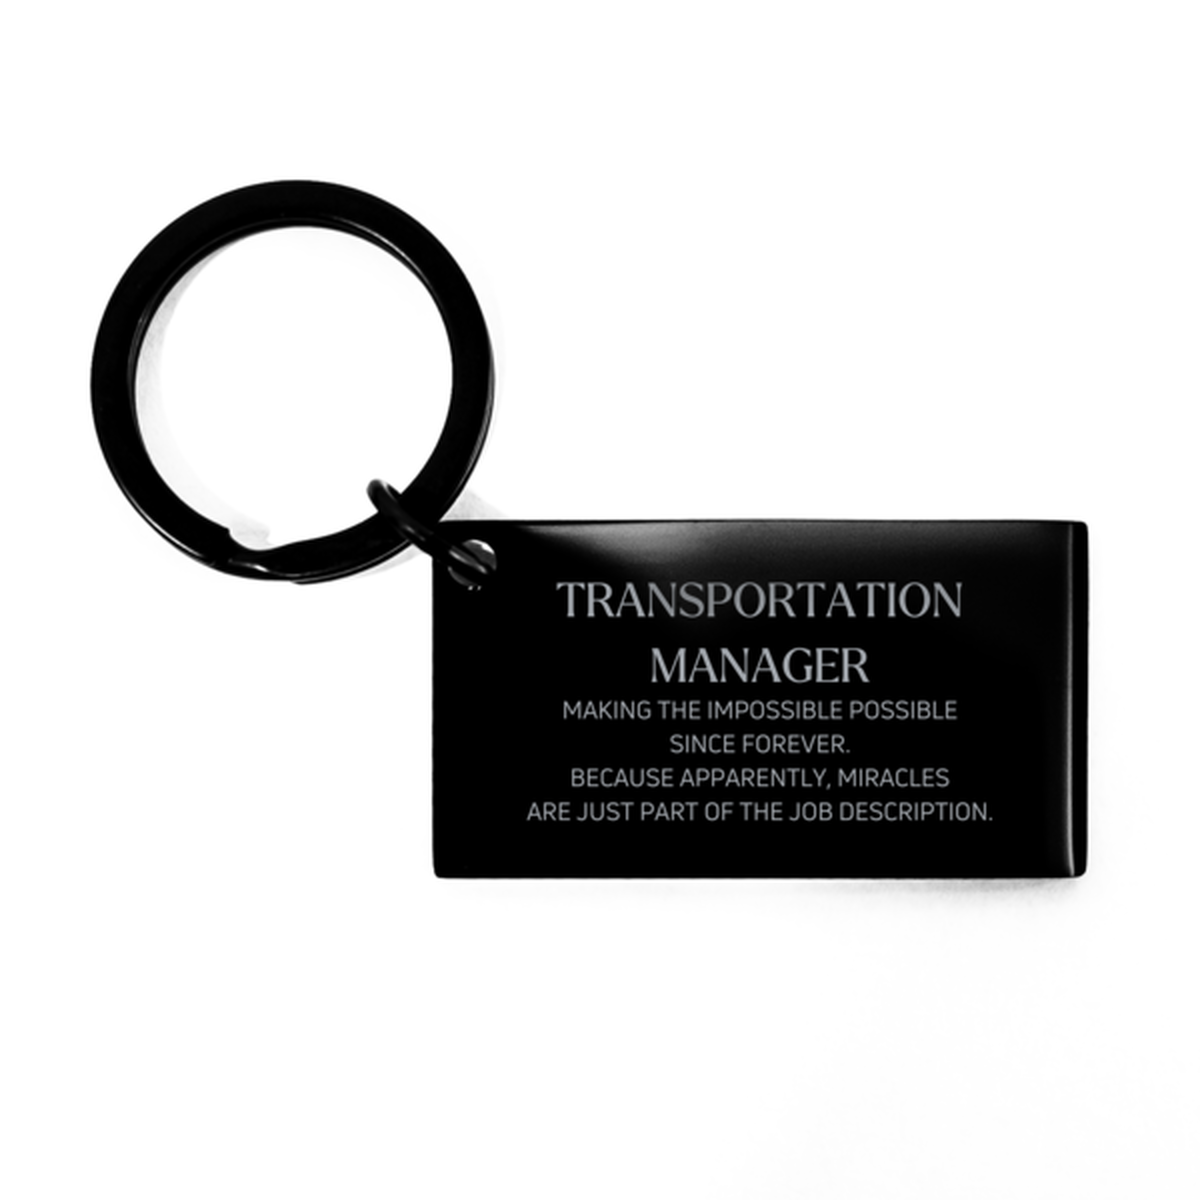 Funny Transportation Manager Gifts, Miracles are just part of the job description, Inspirational Birthday Keychain For Transportation Manager, Men, Women, Coworkers, Friends, Boss